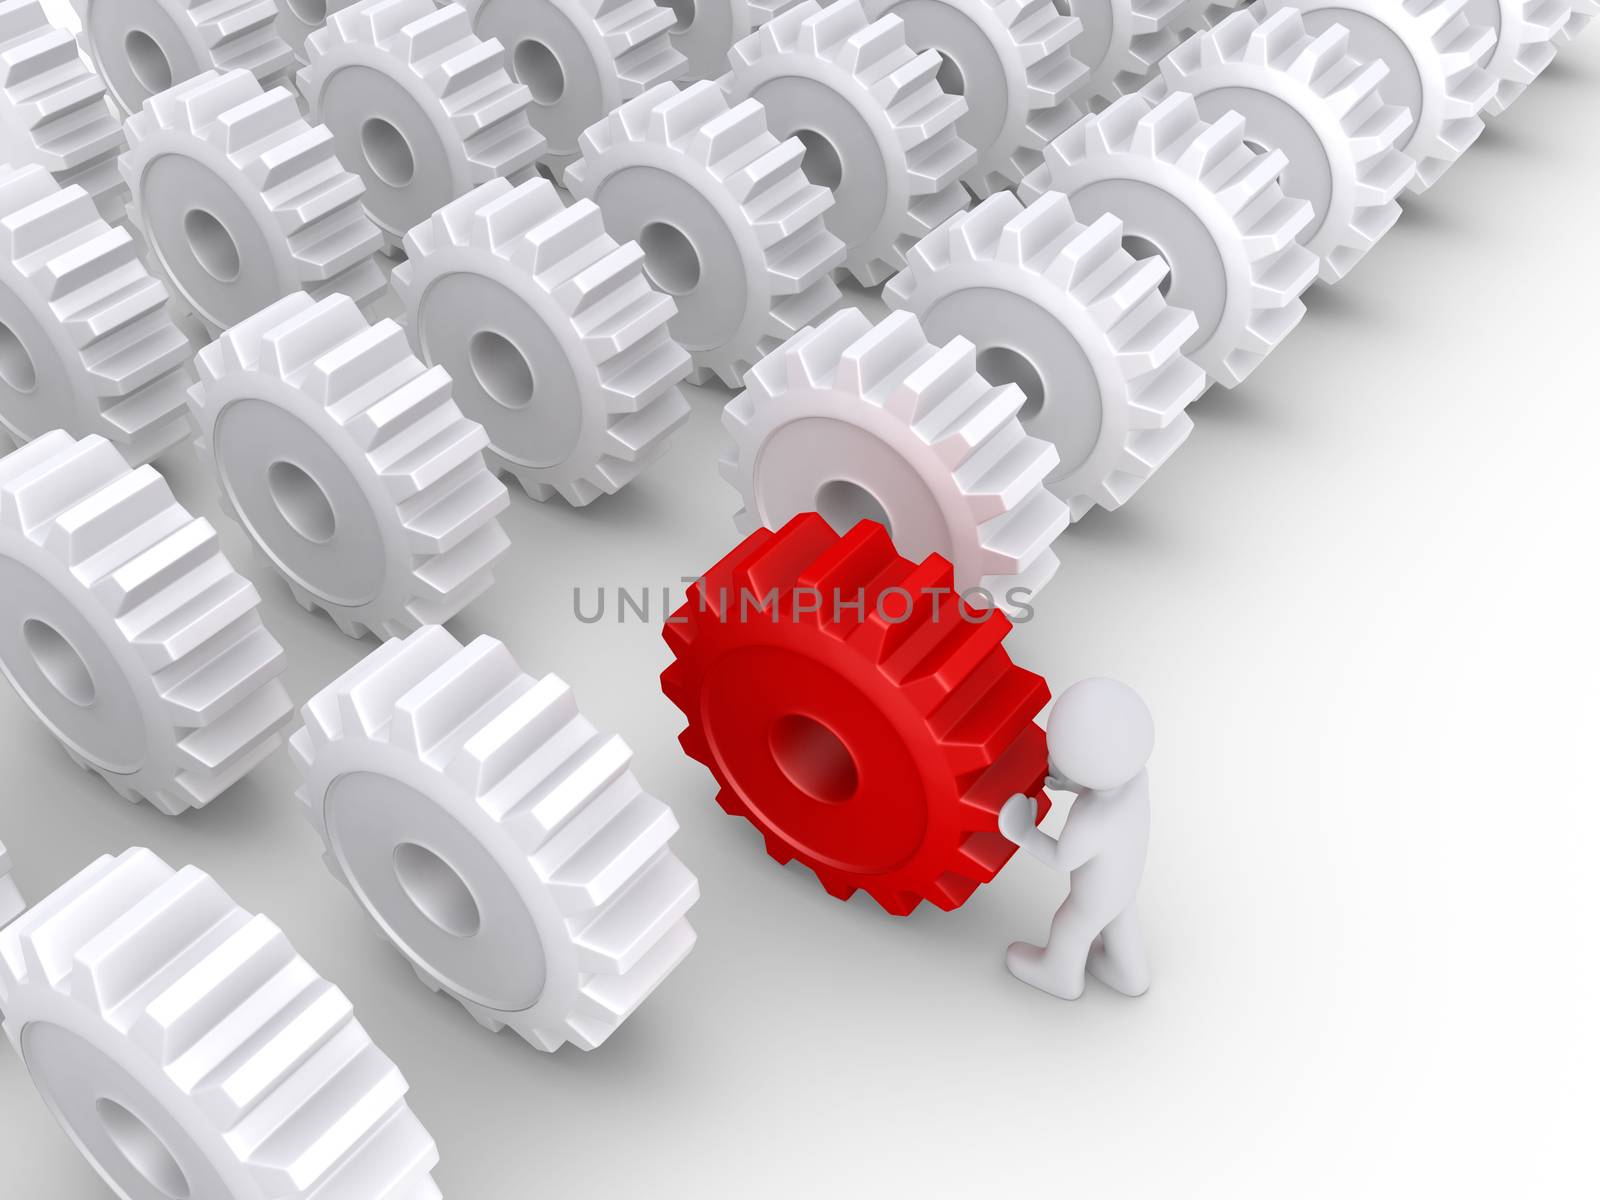 3d person is placing a red cogwheel in front of others